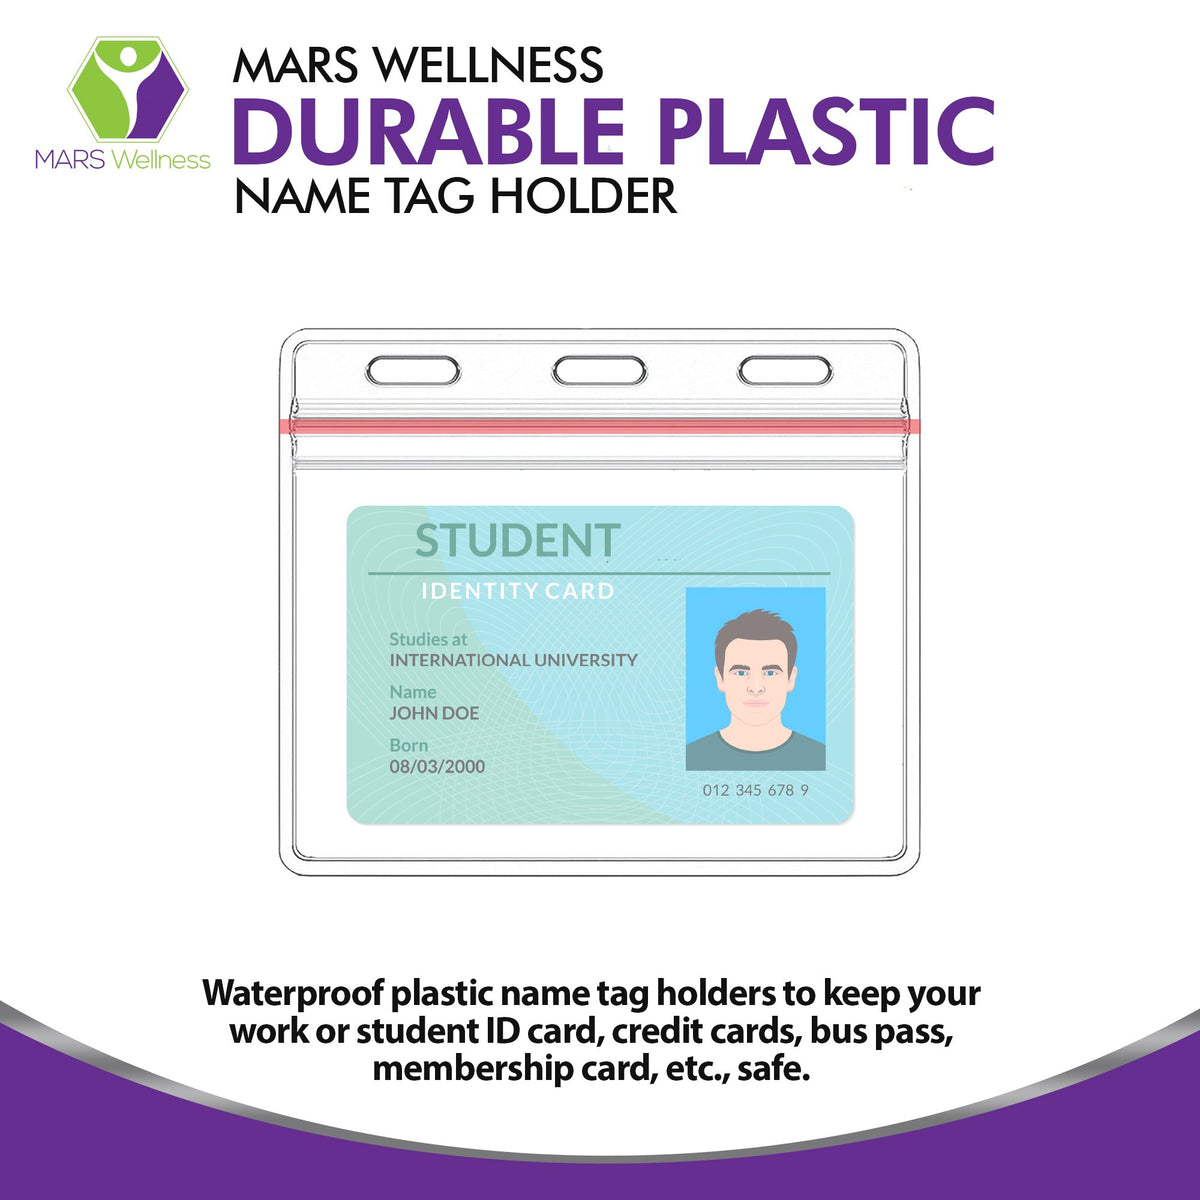 Durable Plastic Name Tag Holder - Extra Thick Immunization Card Protector - Reusable Covid Plastic Card Protector - Card Protector Waterproof - 4 x 3 Card Holder Protector